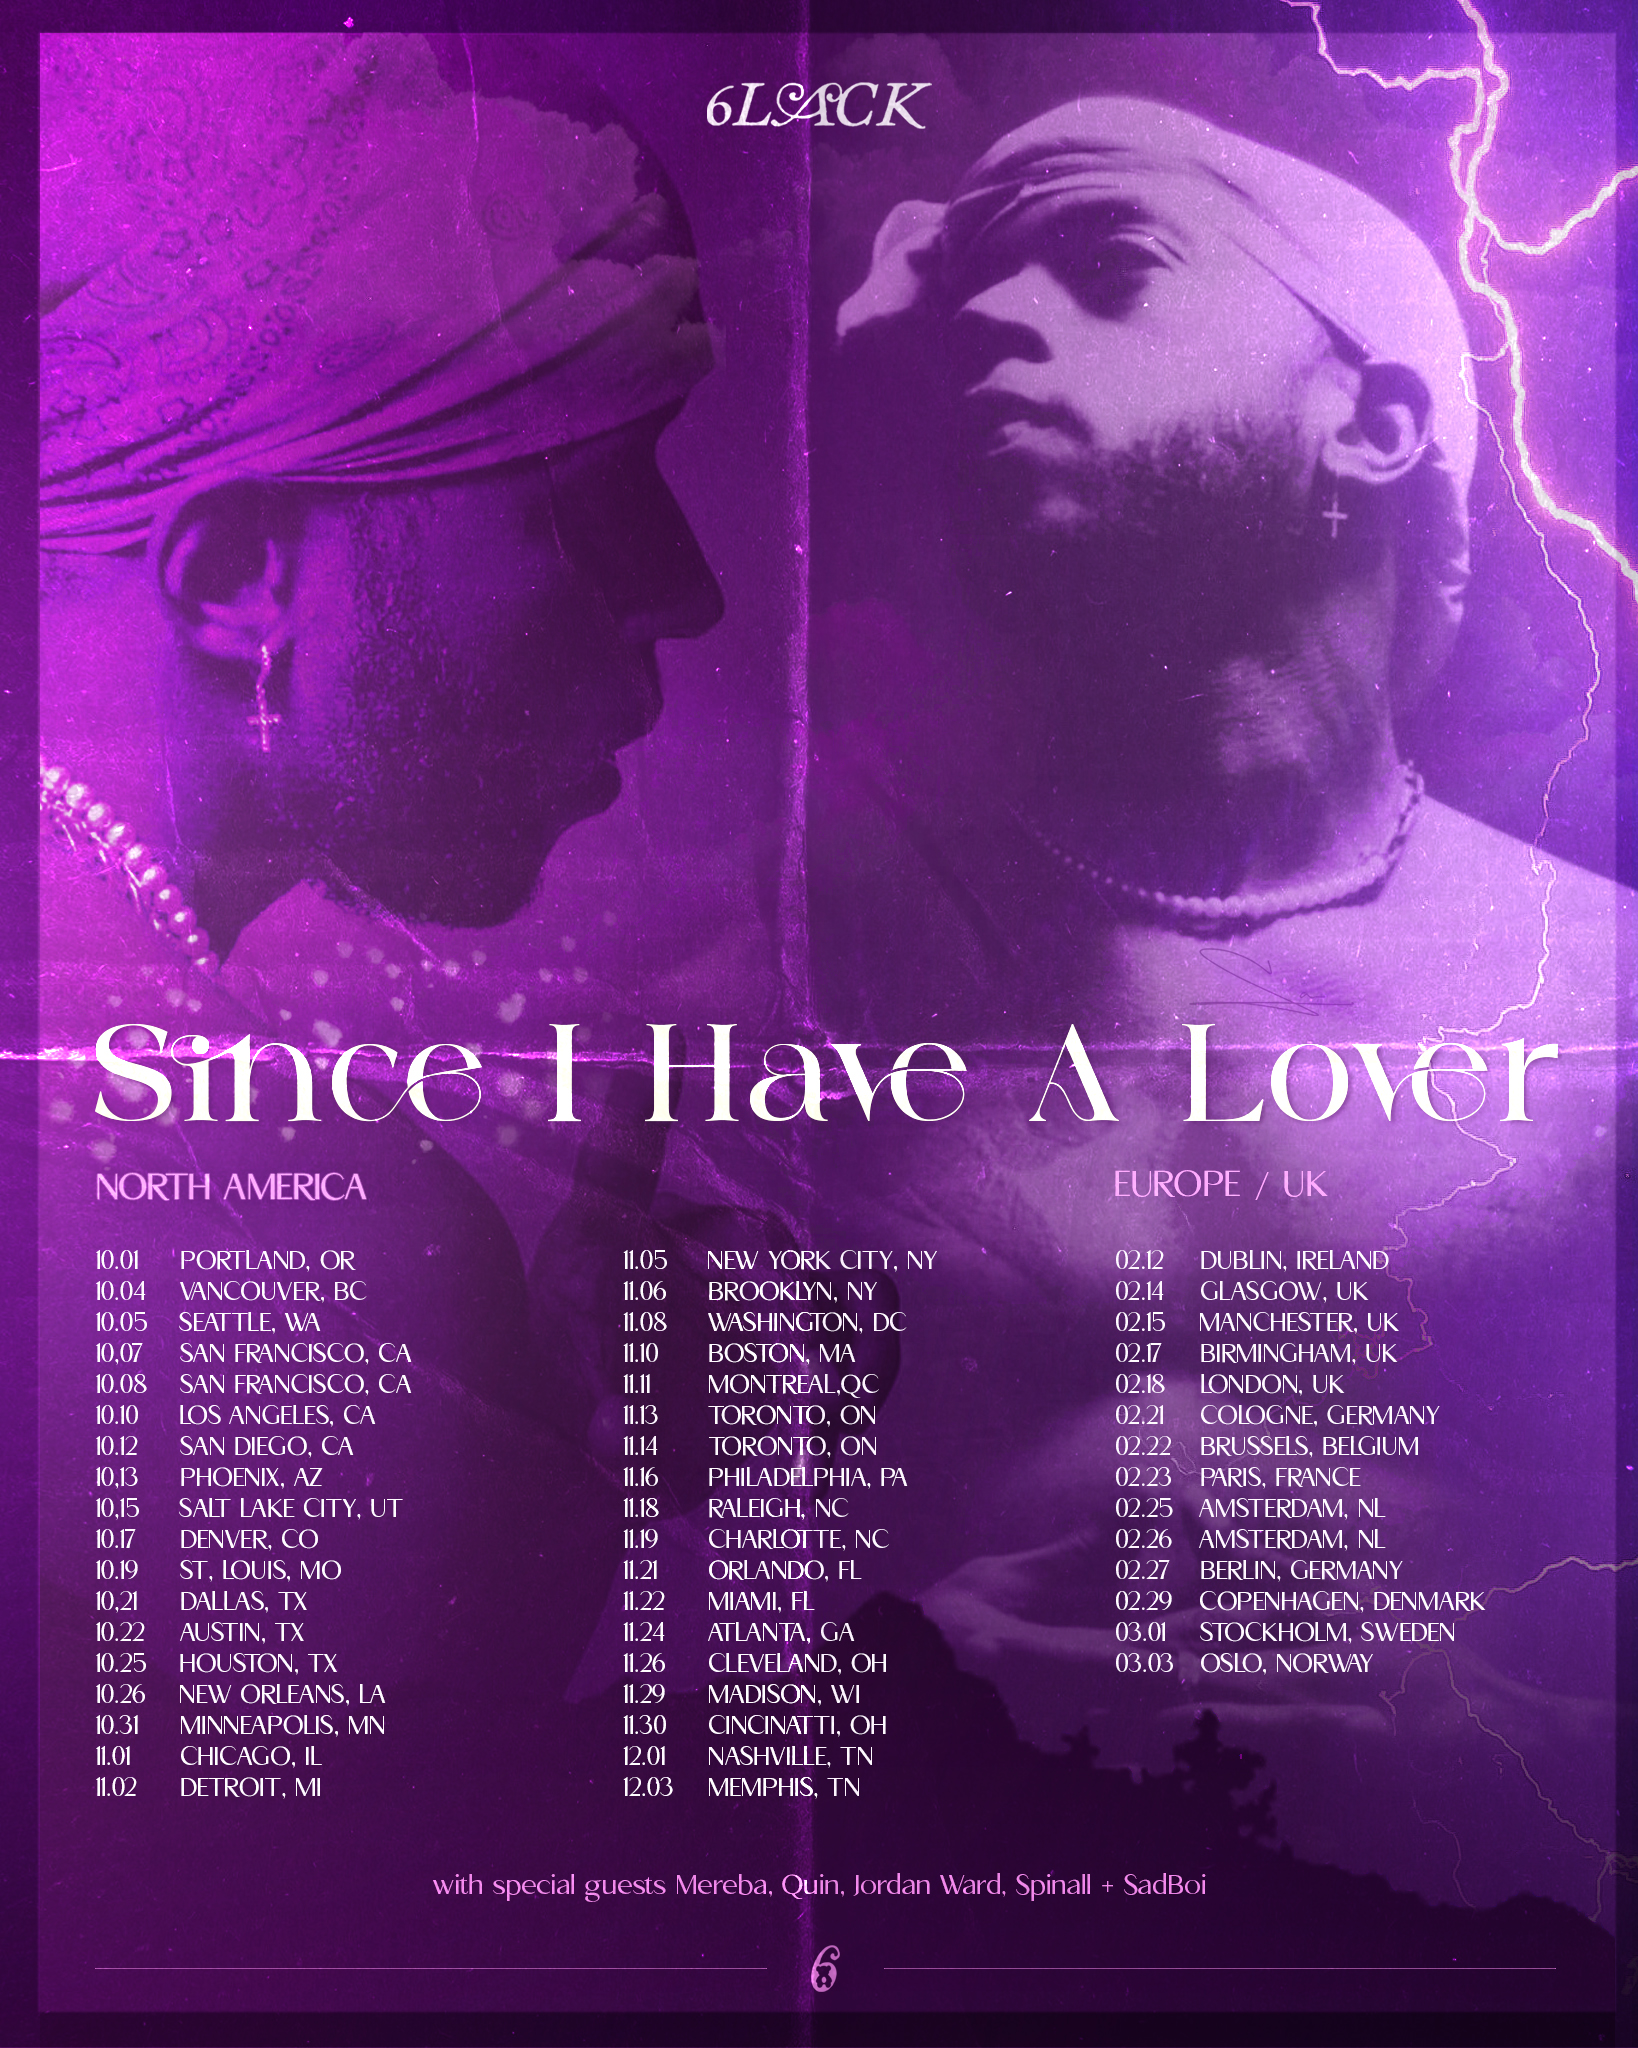 Since I Have A Lover - 6lack [Tour Poster]